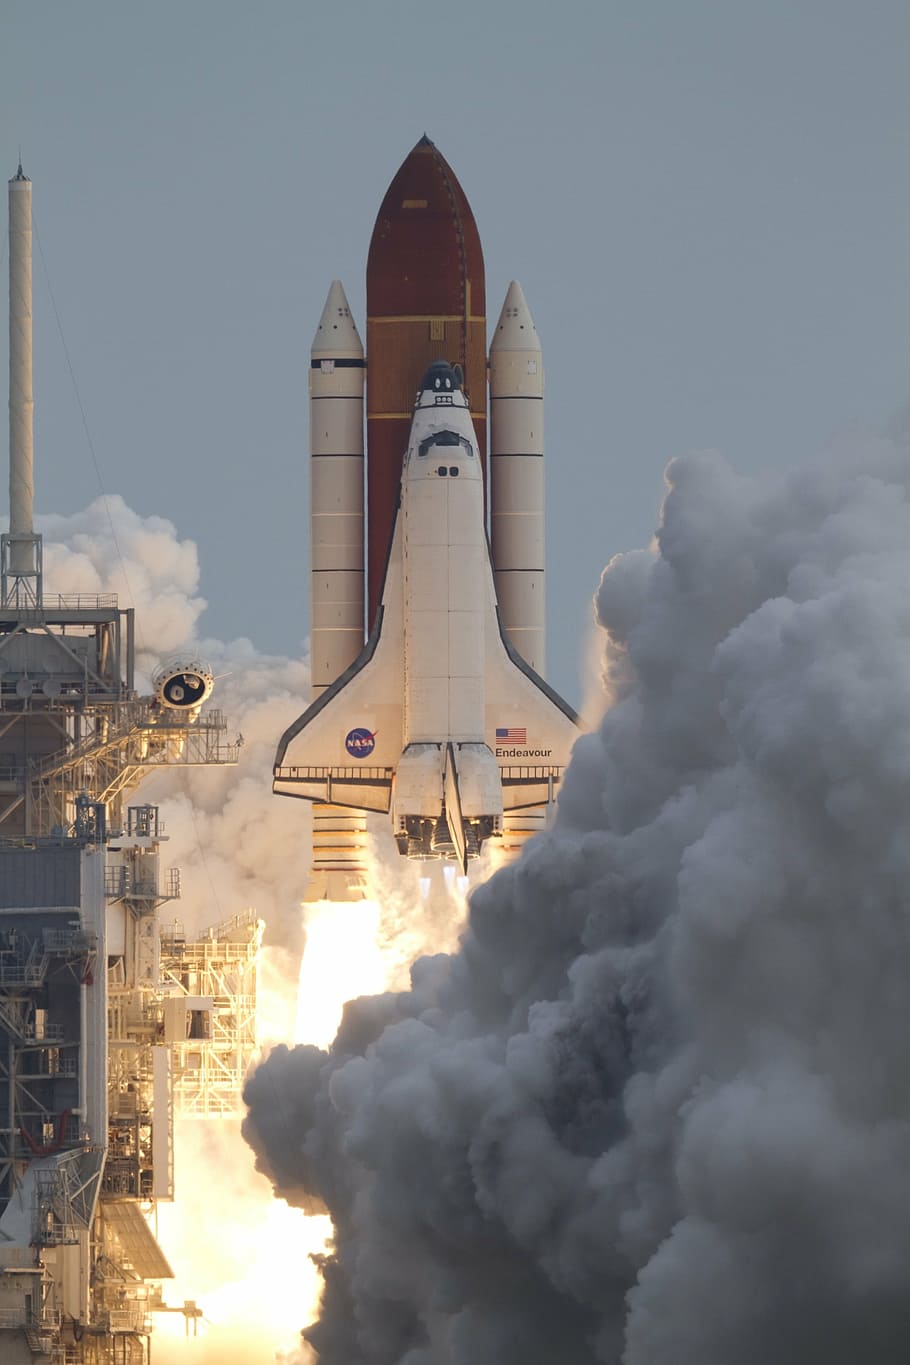 launching white space shuttle, space shuttle endeavour, liftoff